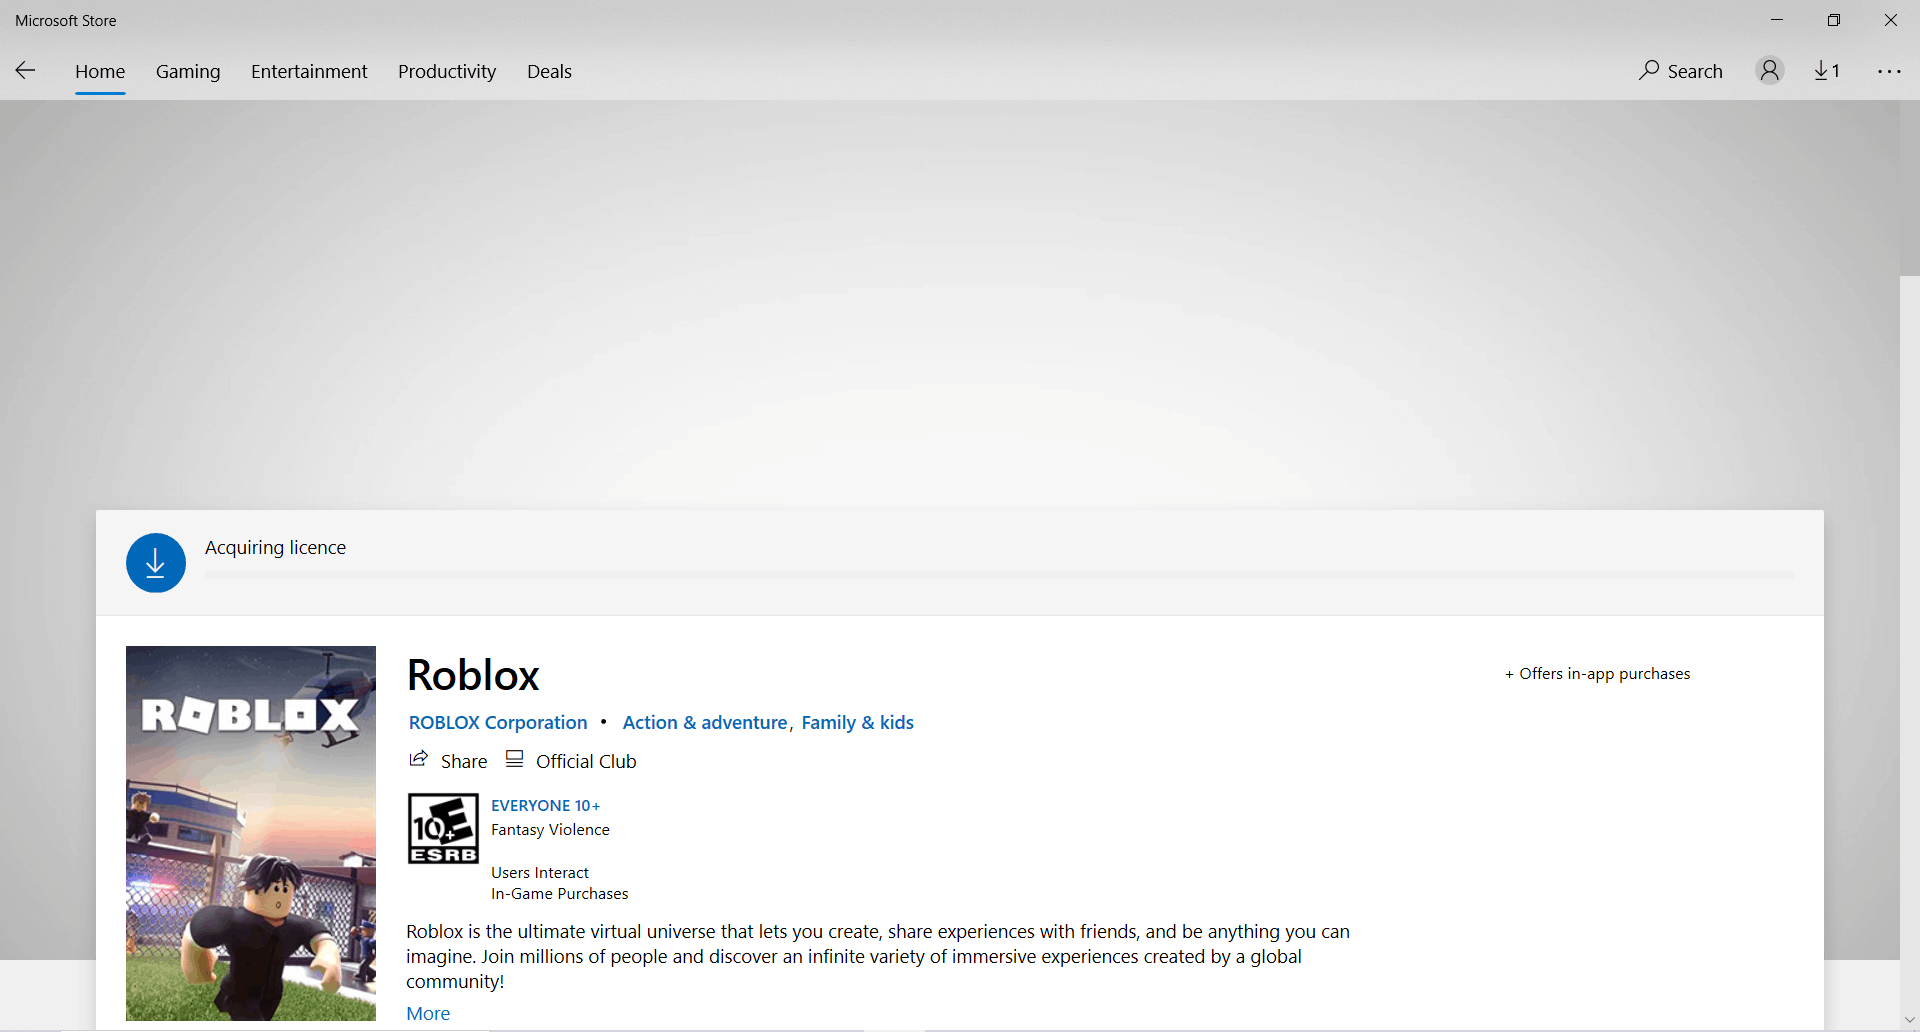 Why i can't login in my roblox account with microsoft store roblox -  Microsoft Community